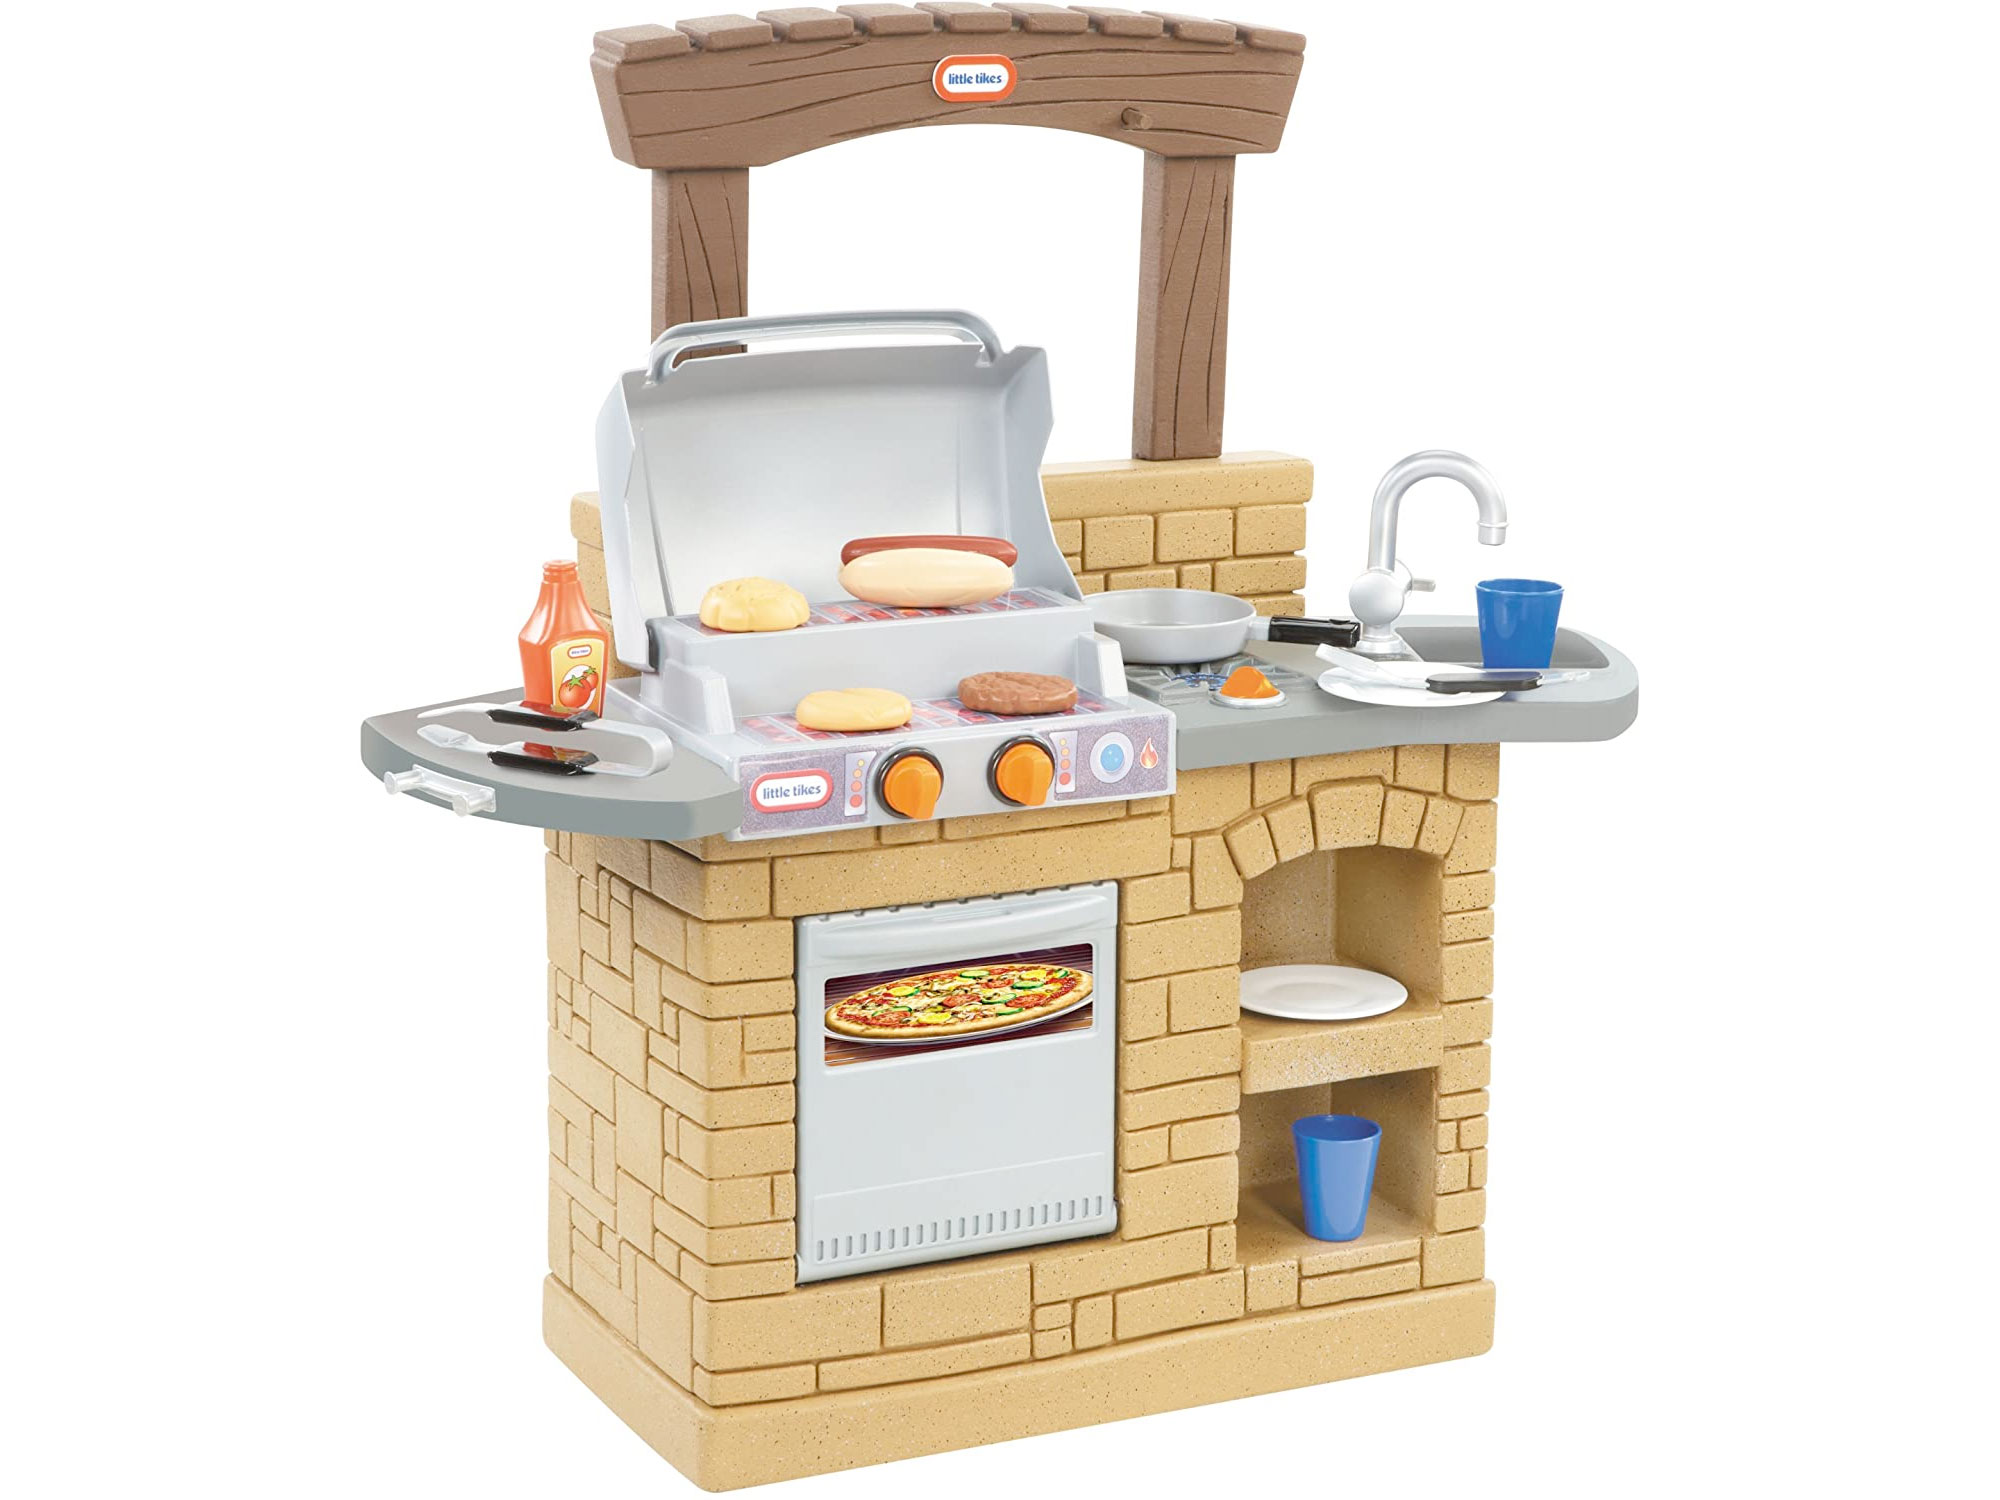 Amazon：Little Tikes Cook ‘n Play Outdoor BBQ只賣$49.97